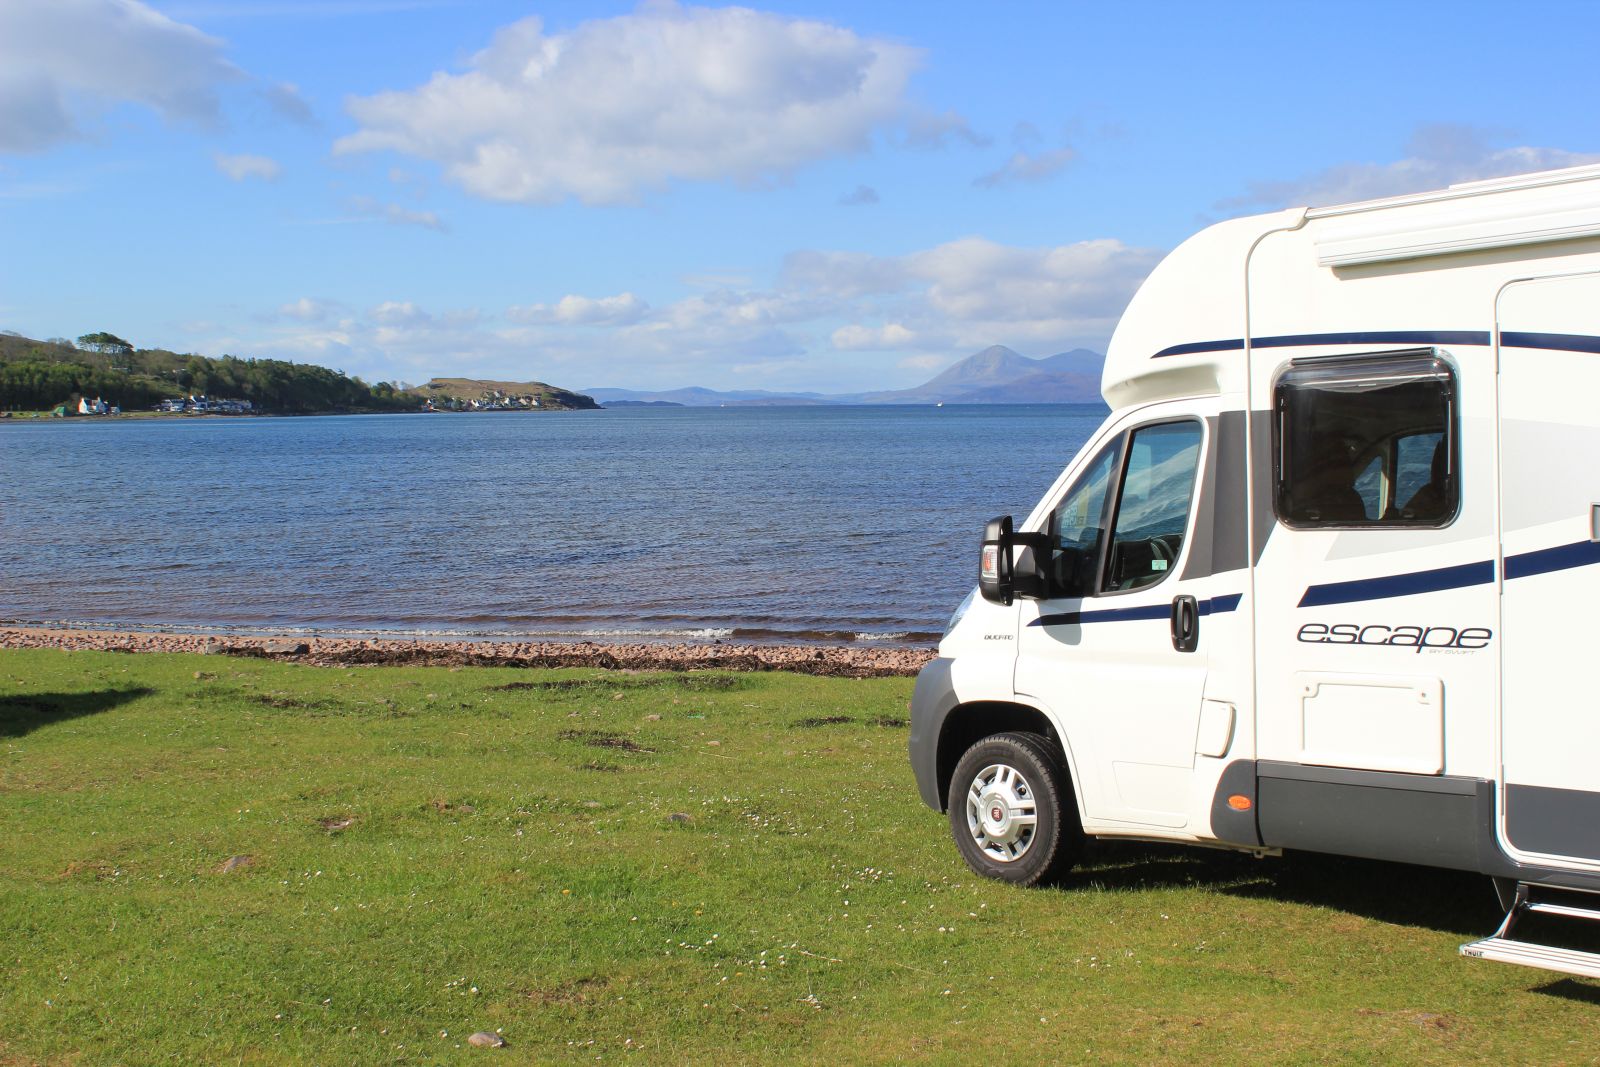 Motorhome parked on Orkney beach